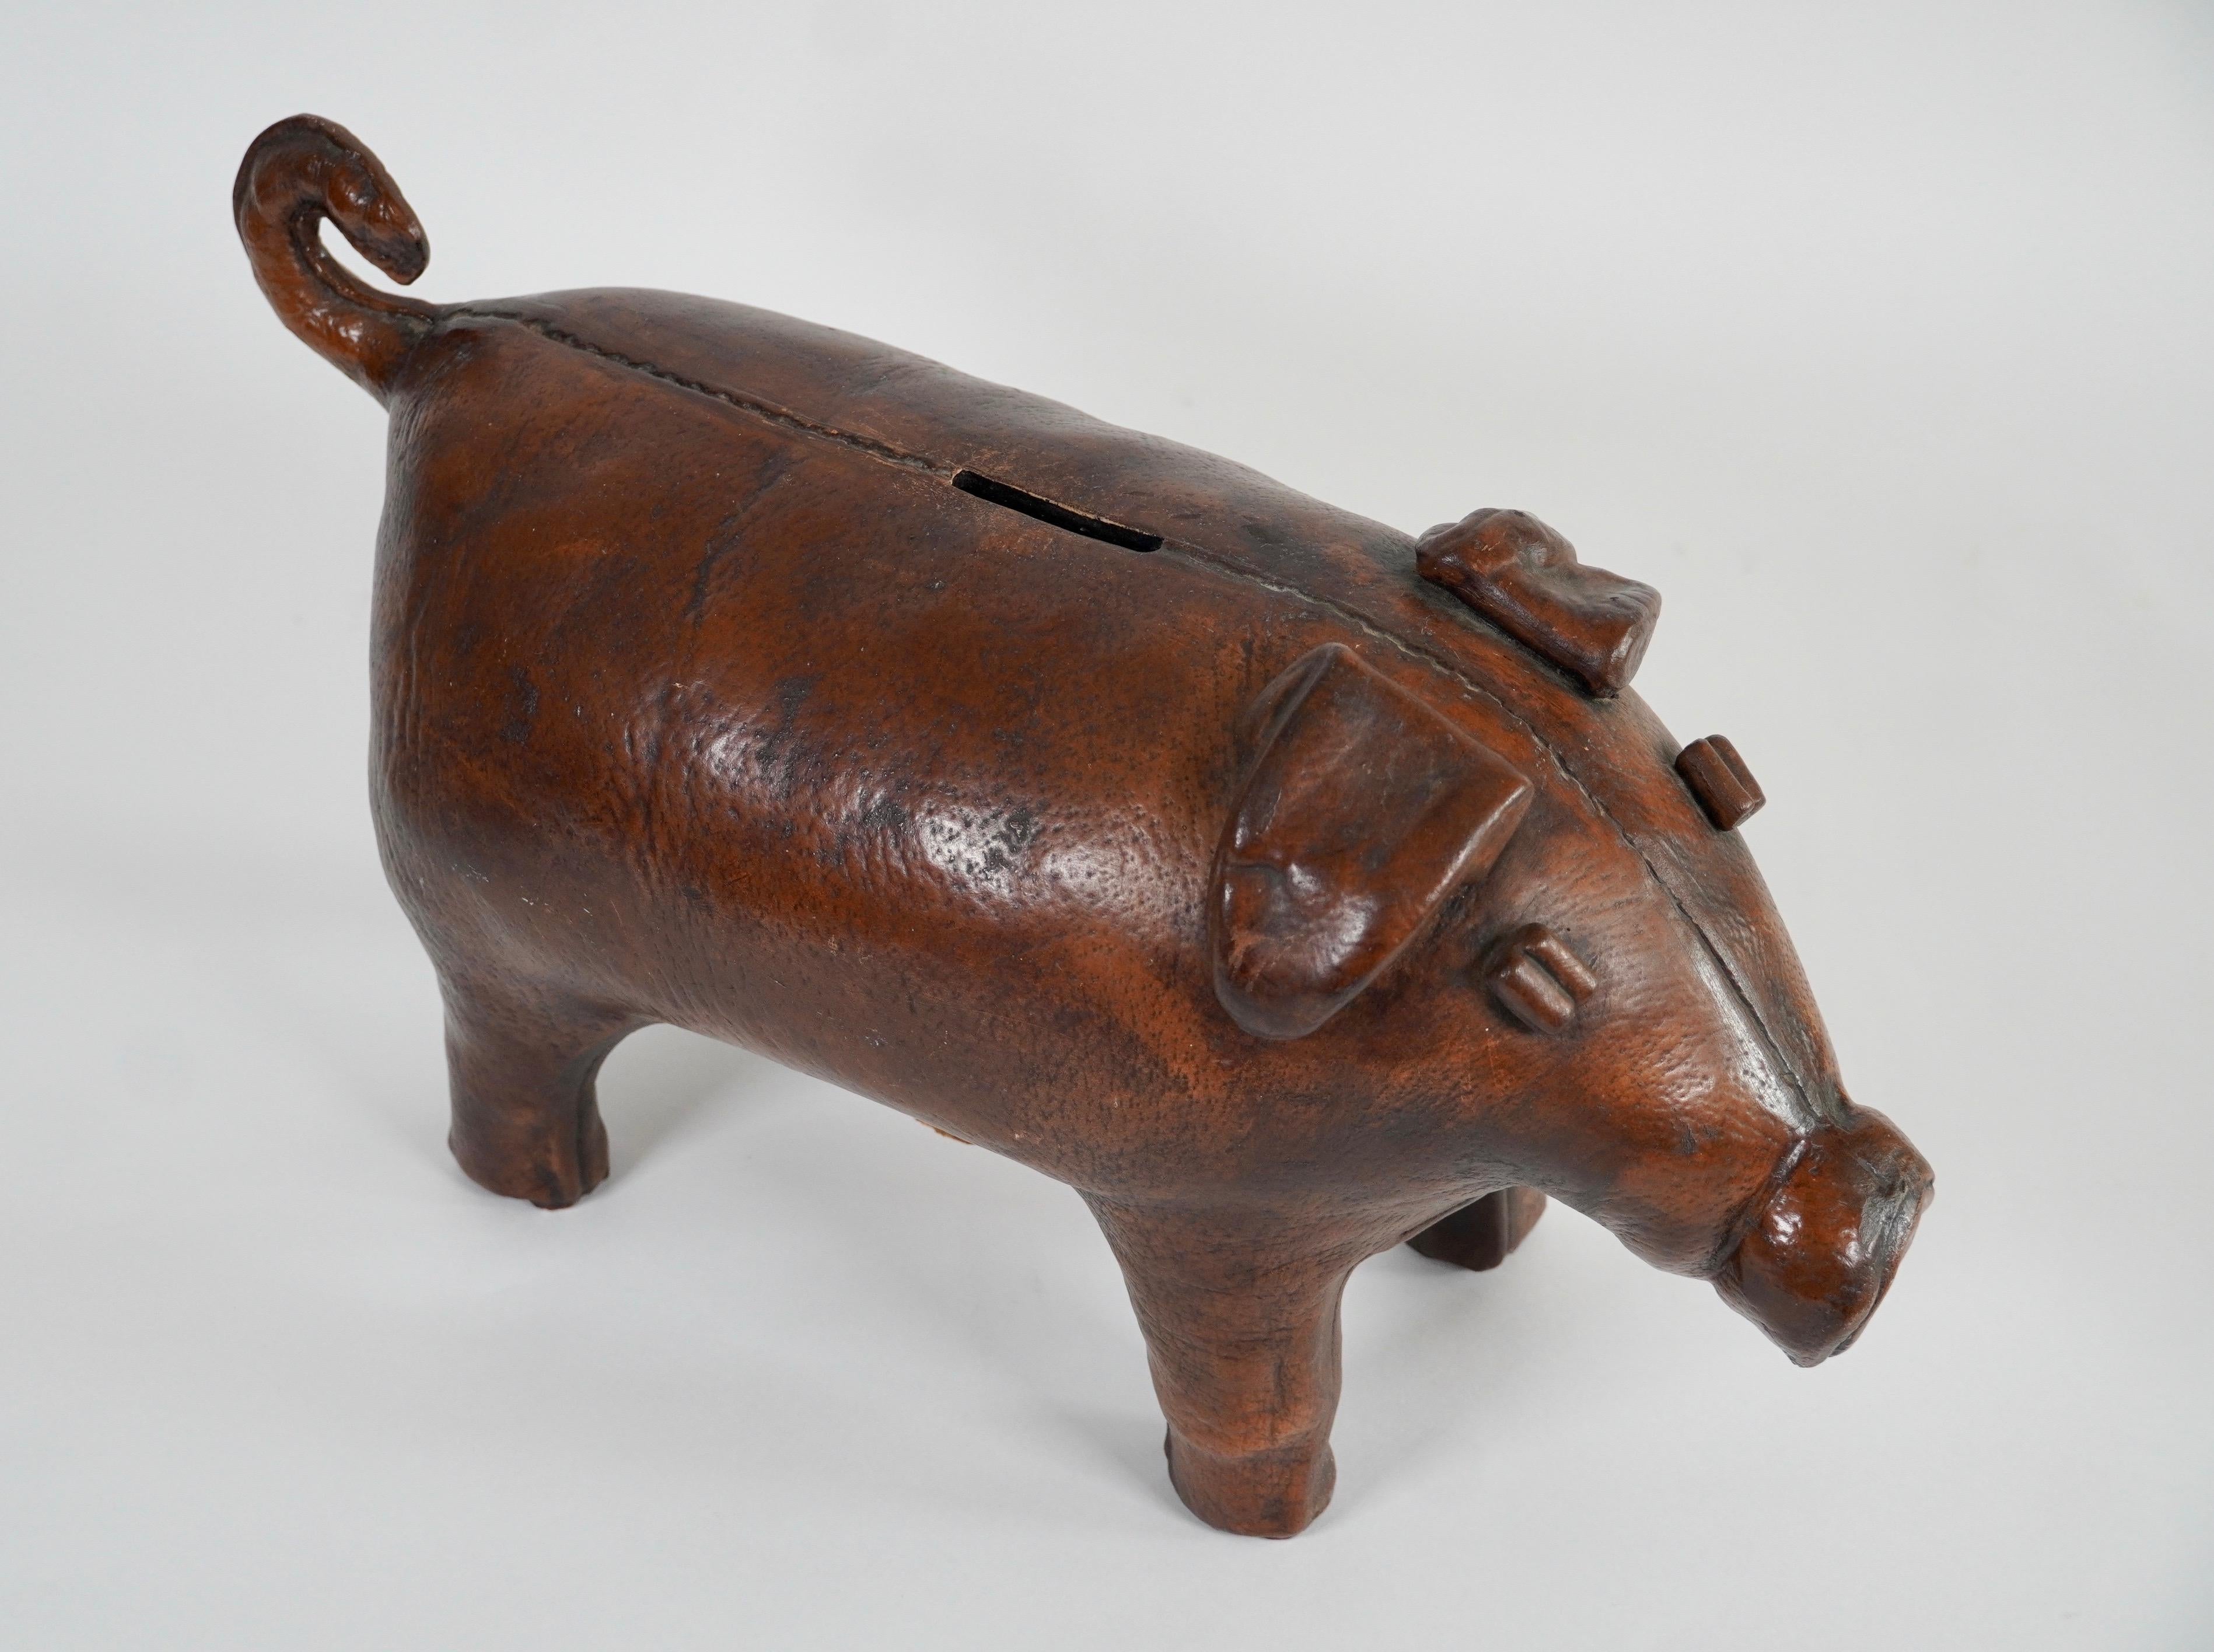 A very unusual Piggy Bank, it being an exact copy of the Omersa leather pig foot rest, but this is a coin bank in ceramic with a slot on the back of the pig for the coins and a cork stopper underneath on its belly to retrieve them. The coloration,